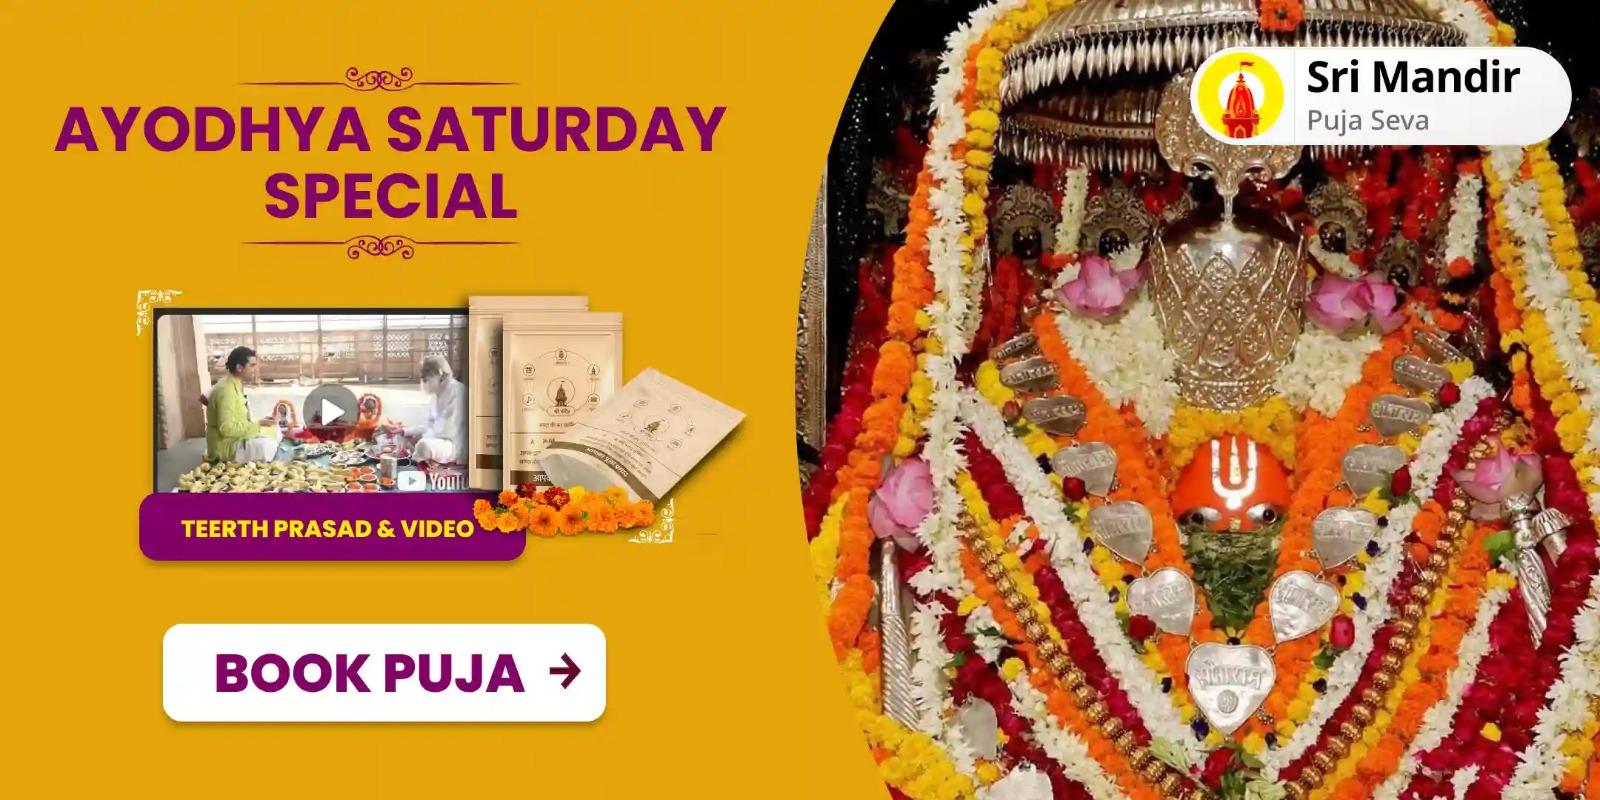 Saturday Ram Janmabhoomi Special 11,000 Hanuman Mool Mantra Jaap and Hanuman Chalisa Path  for Mental and Physical Strength to Destroy Negativity in Life